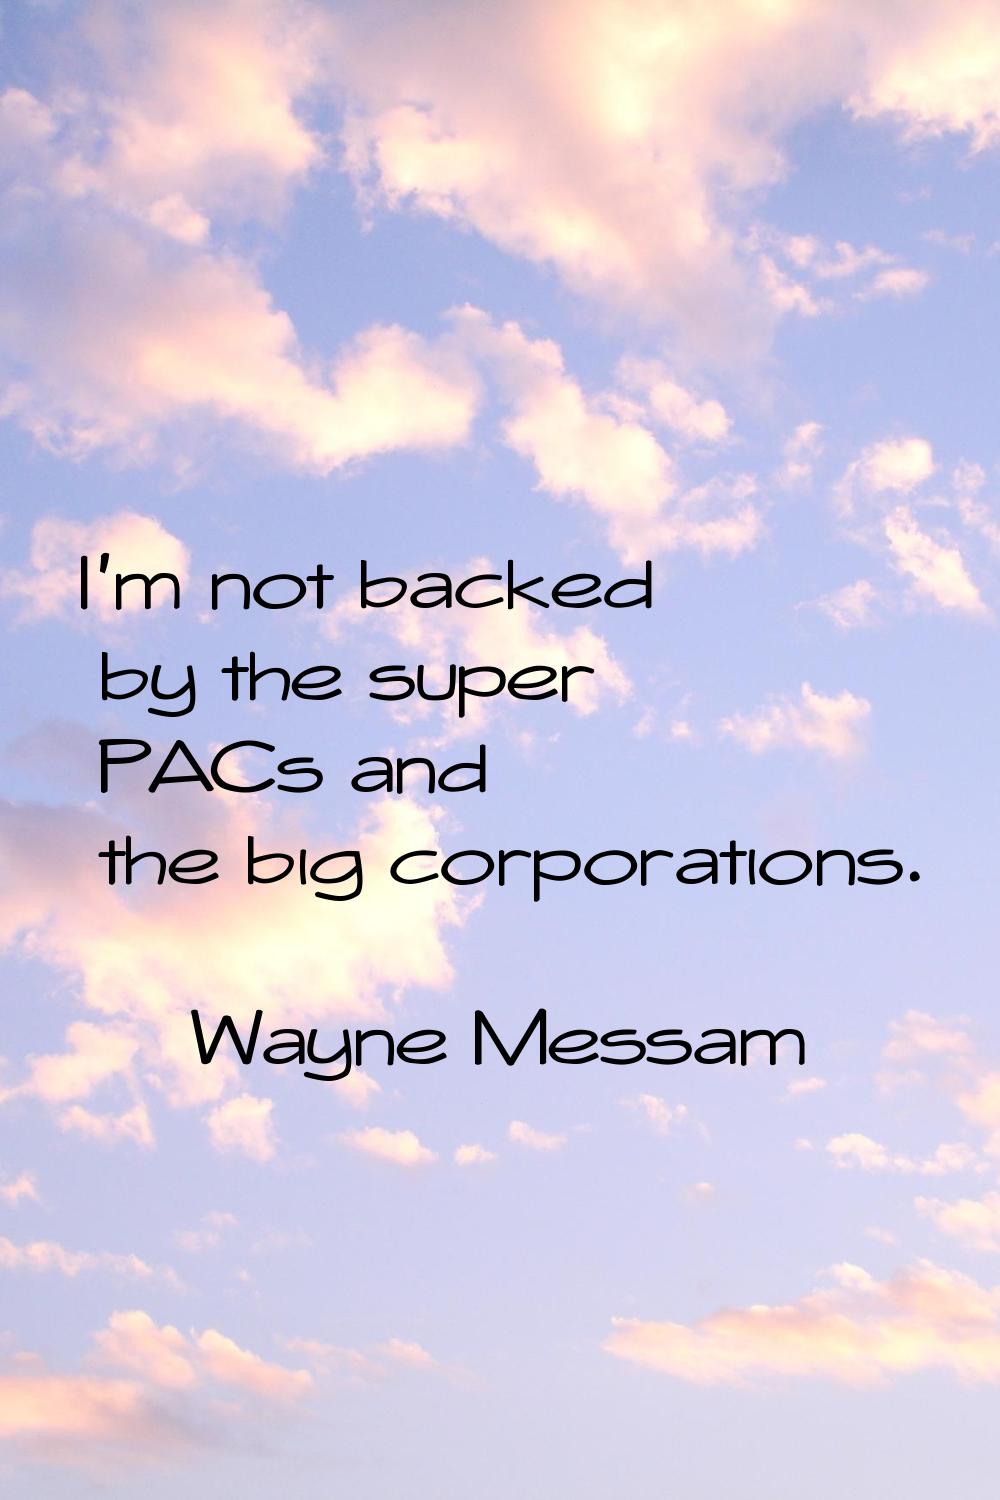 I'm not backed by the super PACs and the big corporations.